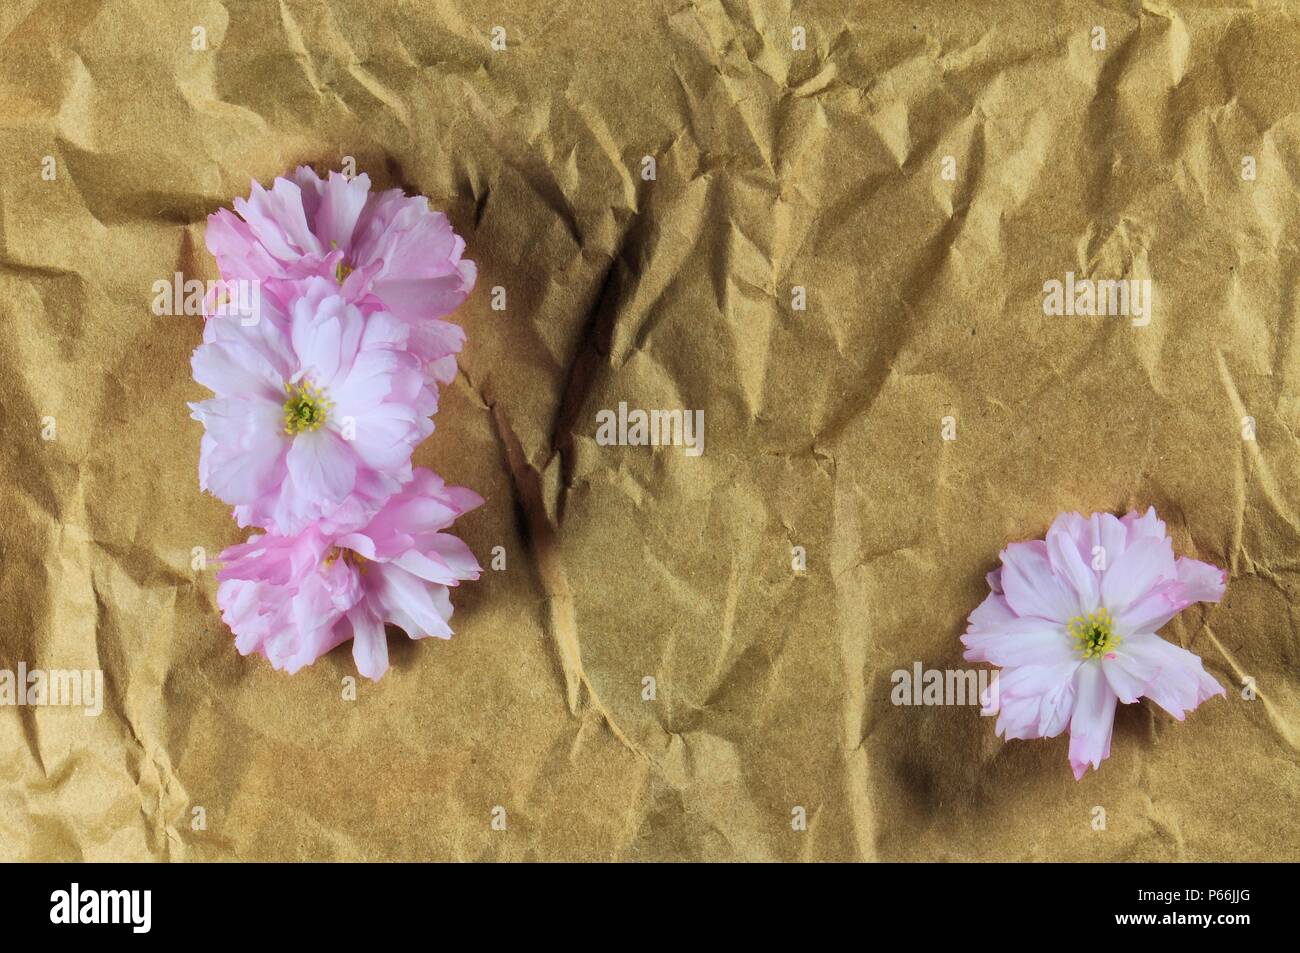 Decorative Floral Pink Parchment Paper For A Background Stock